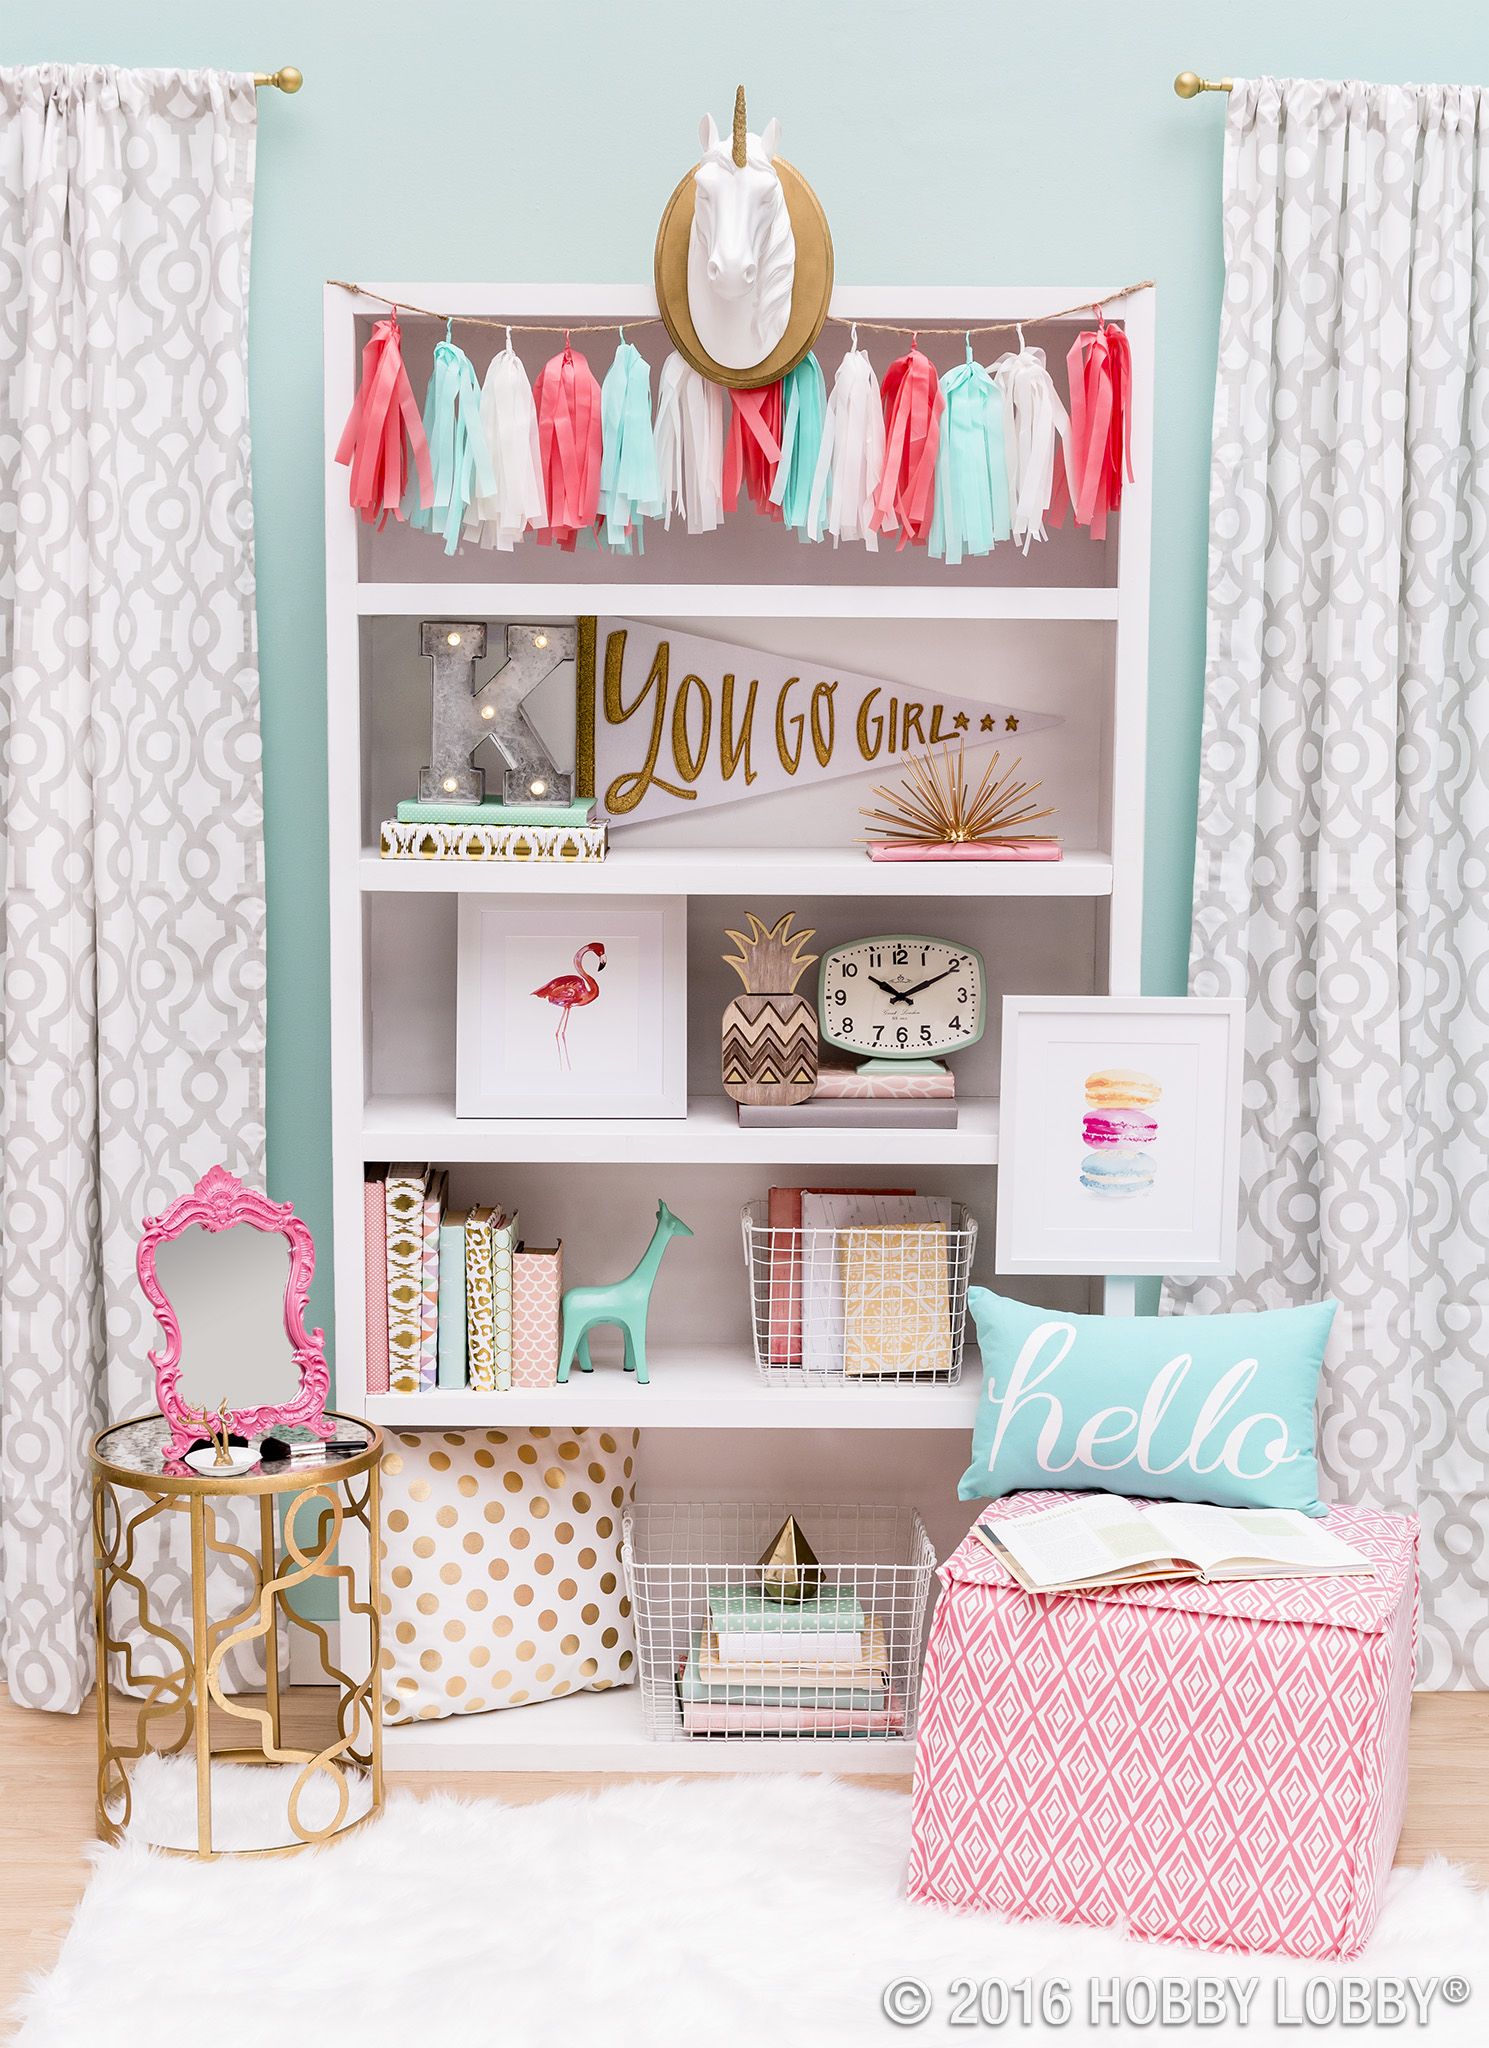 room decorations for girls is your little darlingu0027s decor ready for an update? spruce up MIJDXYS